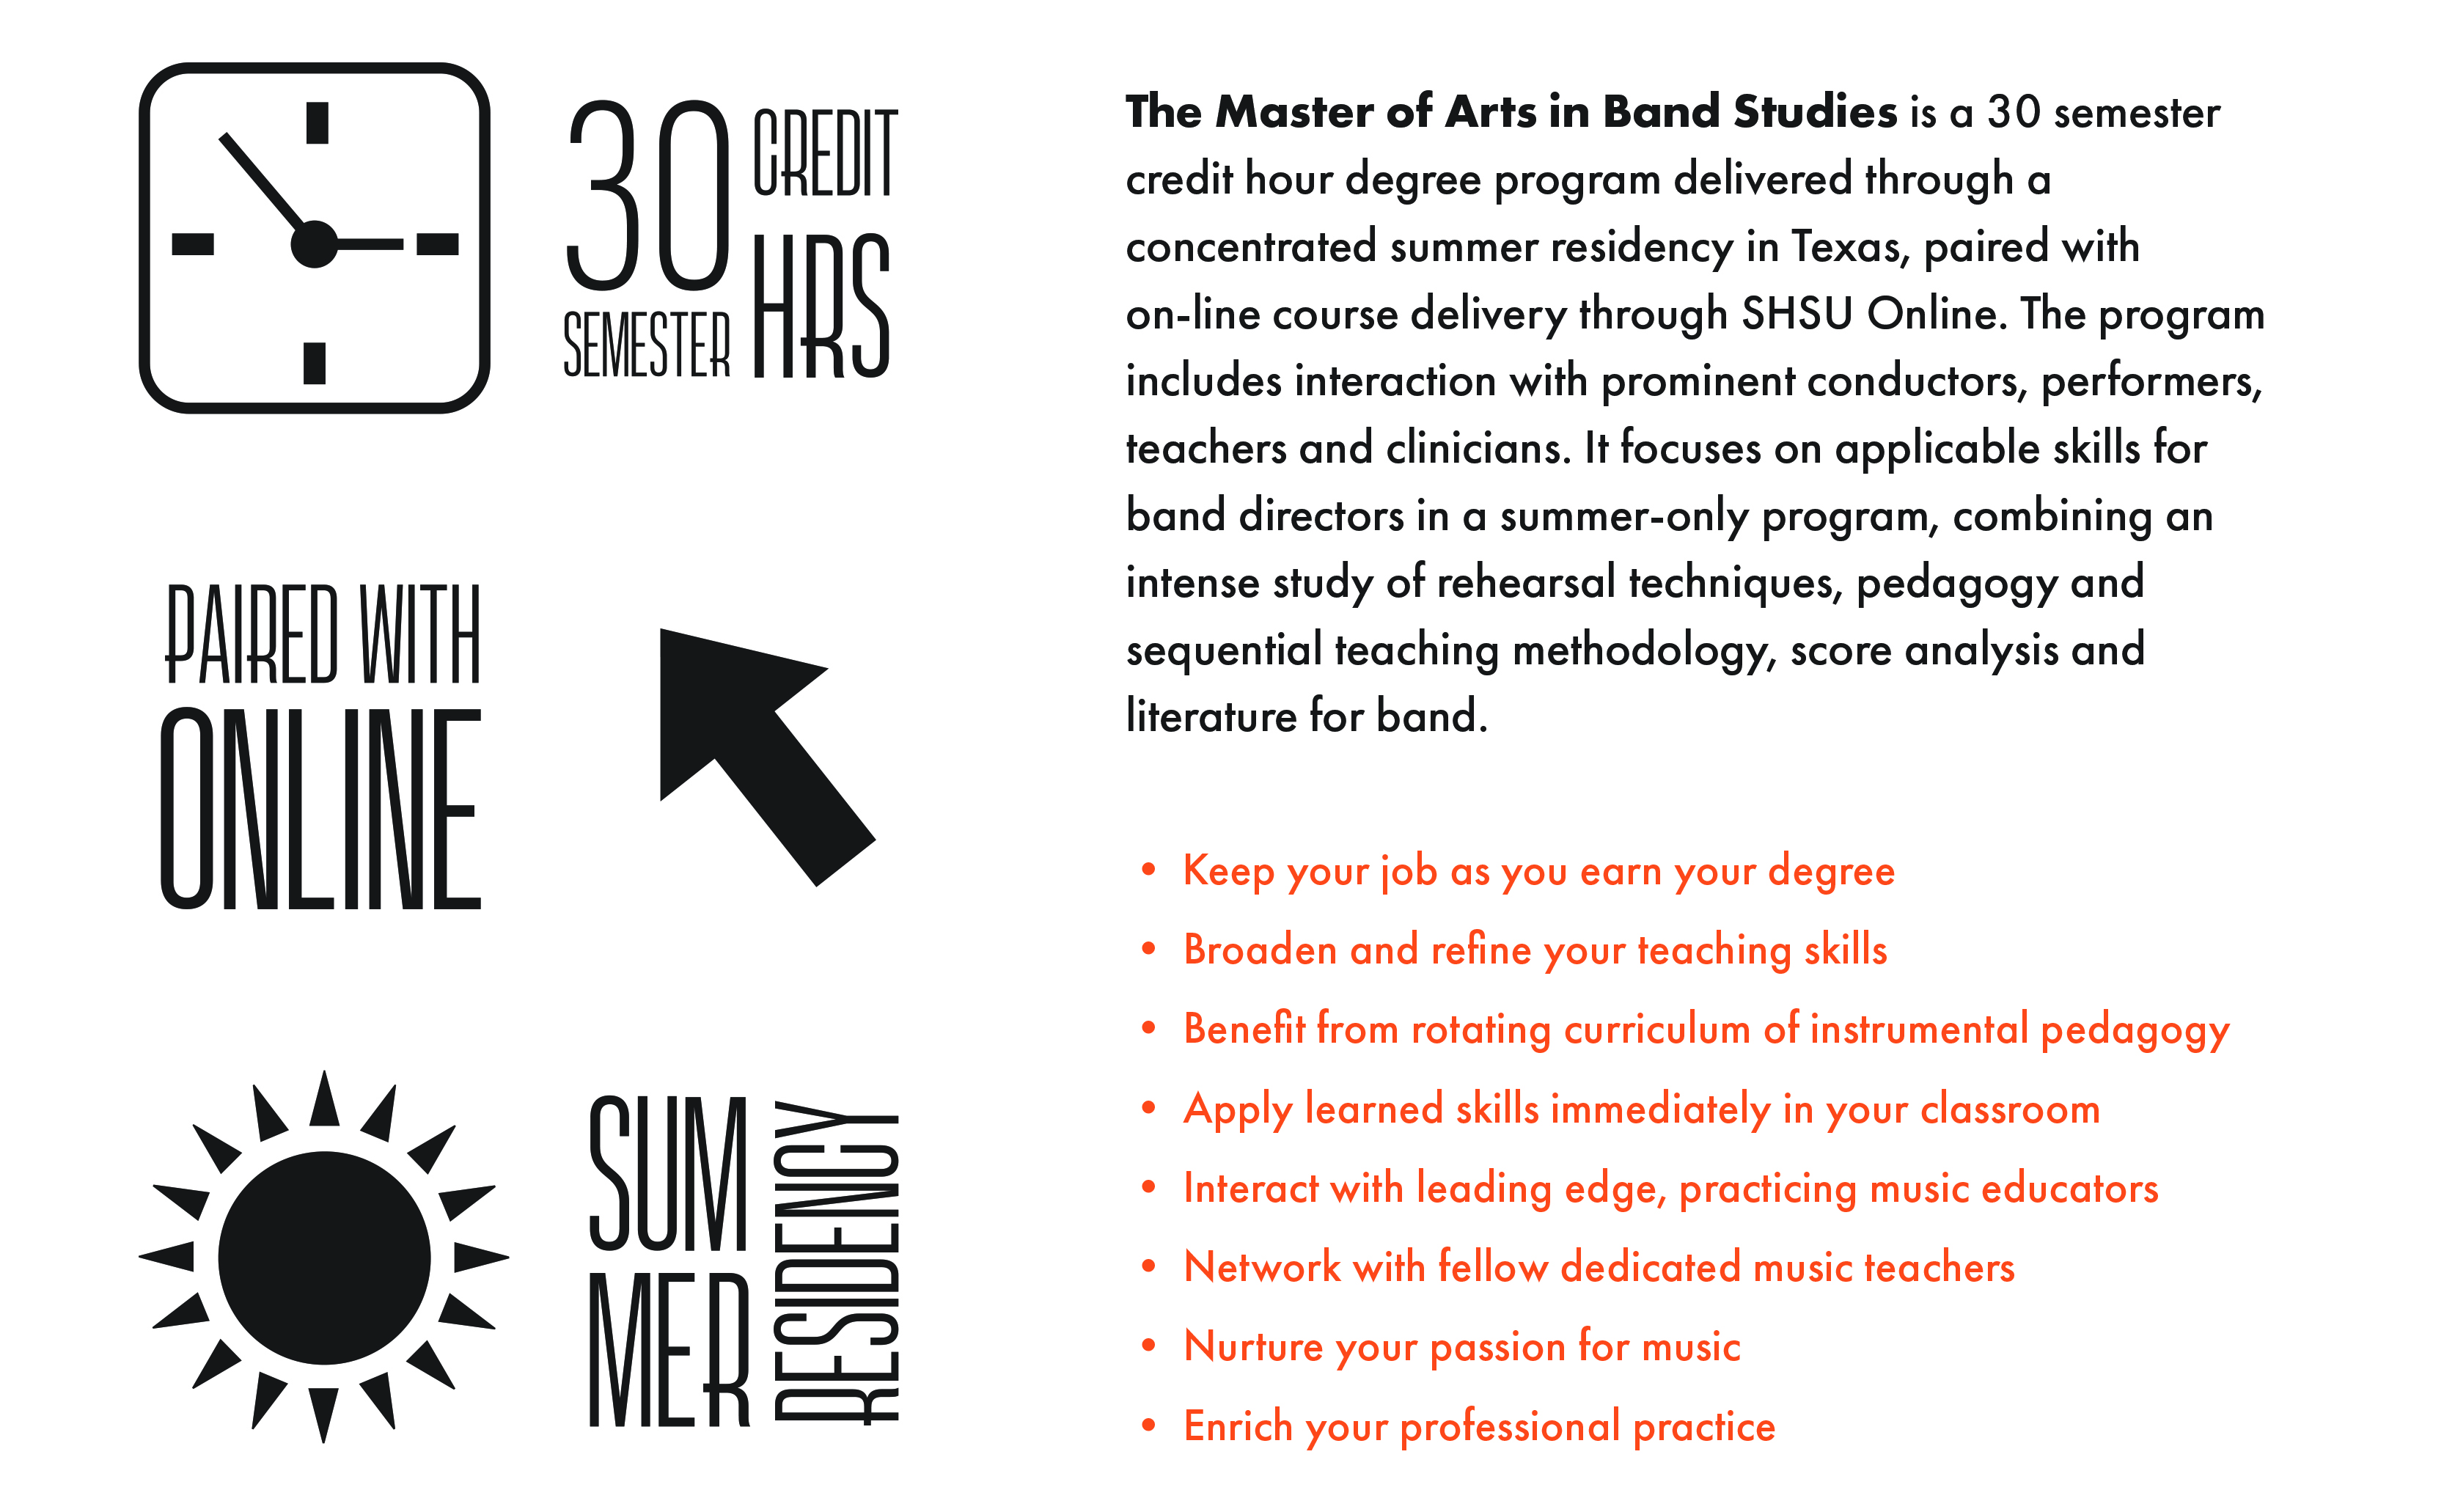 The Master of Arts in Band Studies
Features:
- 30 semester credit hours
- Paired with Online
- Summer Residency

The Master of Arts in Band Studies is a 30 semester credit hour degree program delivered through a concentrated summer residency in Texas, paired with on-line course delivery through SHSU Online. The program includes interaction with prominent conductors, performers, teachers, and clinicians. It focuses on applicable skills for band directors in a summer-only program, combining an intense study of rehearsal techniques, pedagogy and sequential teaching methodology, score analysis and literature for band. 

Highlights:
- Keep your job as you earn your degree
- Broaden and refine your teaching skills
- Benefit from rotating curriculum of instrument pedagogy
- Apply learned skills immediately in your classroom
- Interact with leading edge, practicing music educators
- Network with fellow dedicated music teachers
- Nurture your passion for music
- Enrich your professional practice